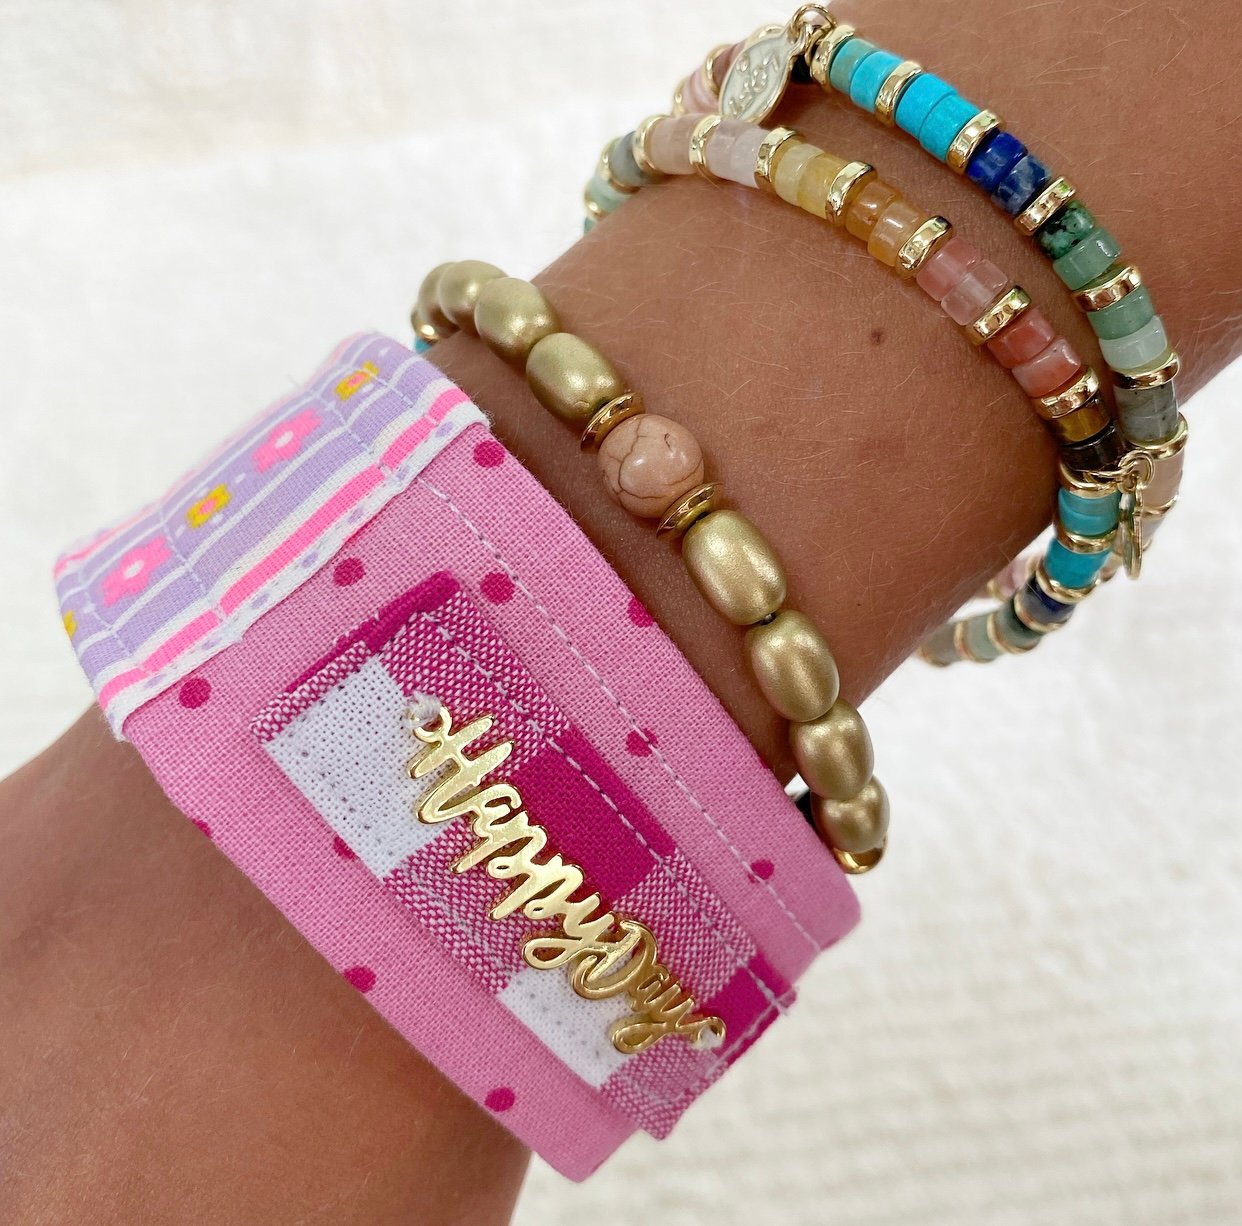 DIY friendship bracelets! 4 EASY stackable arm candy projects! - YouTube